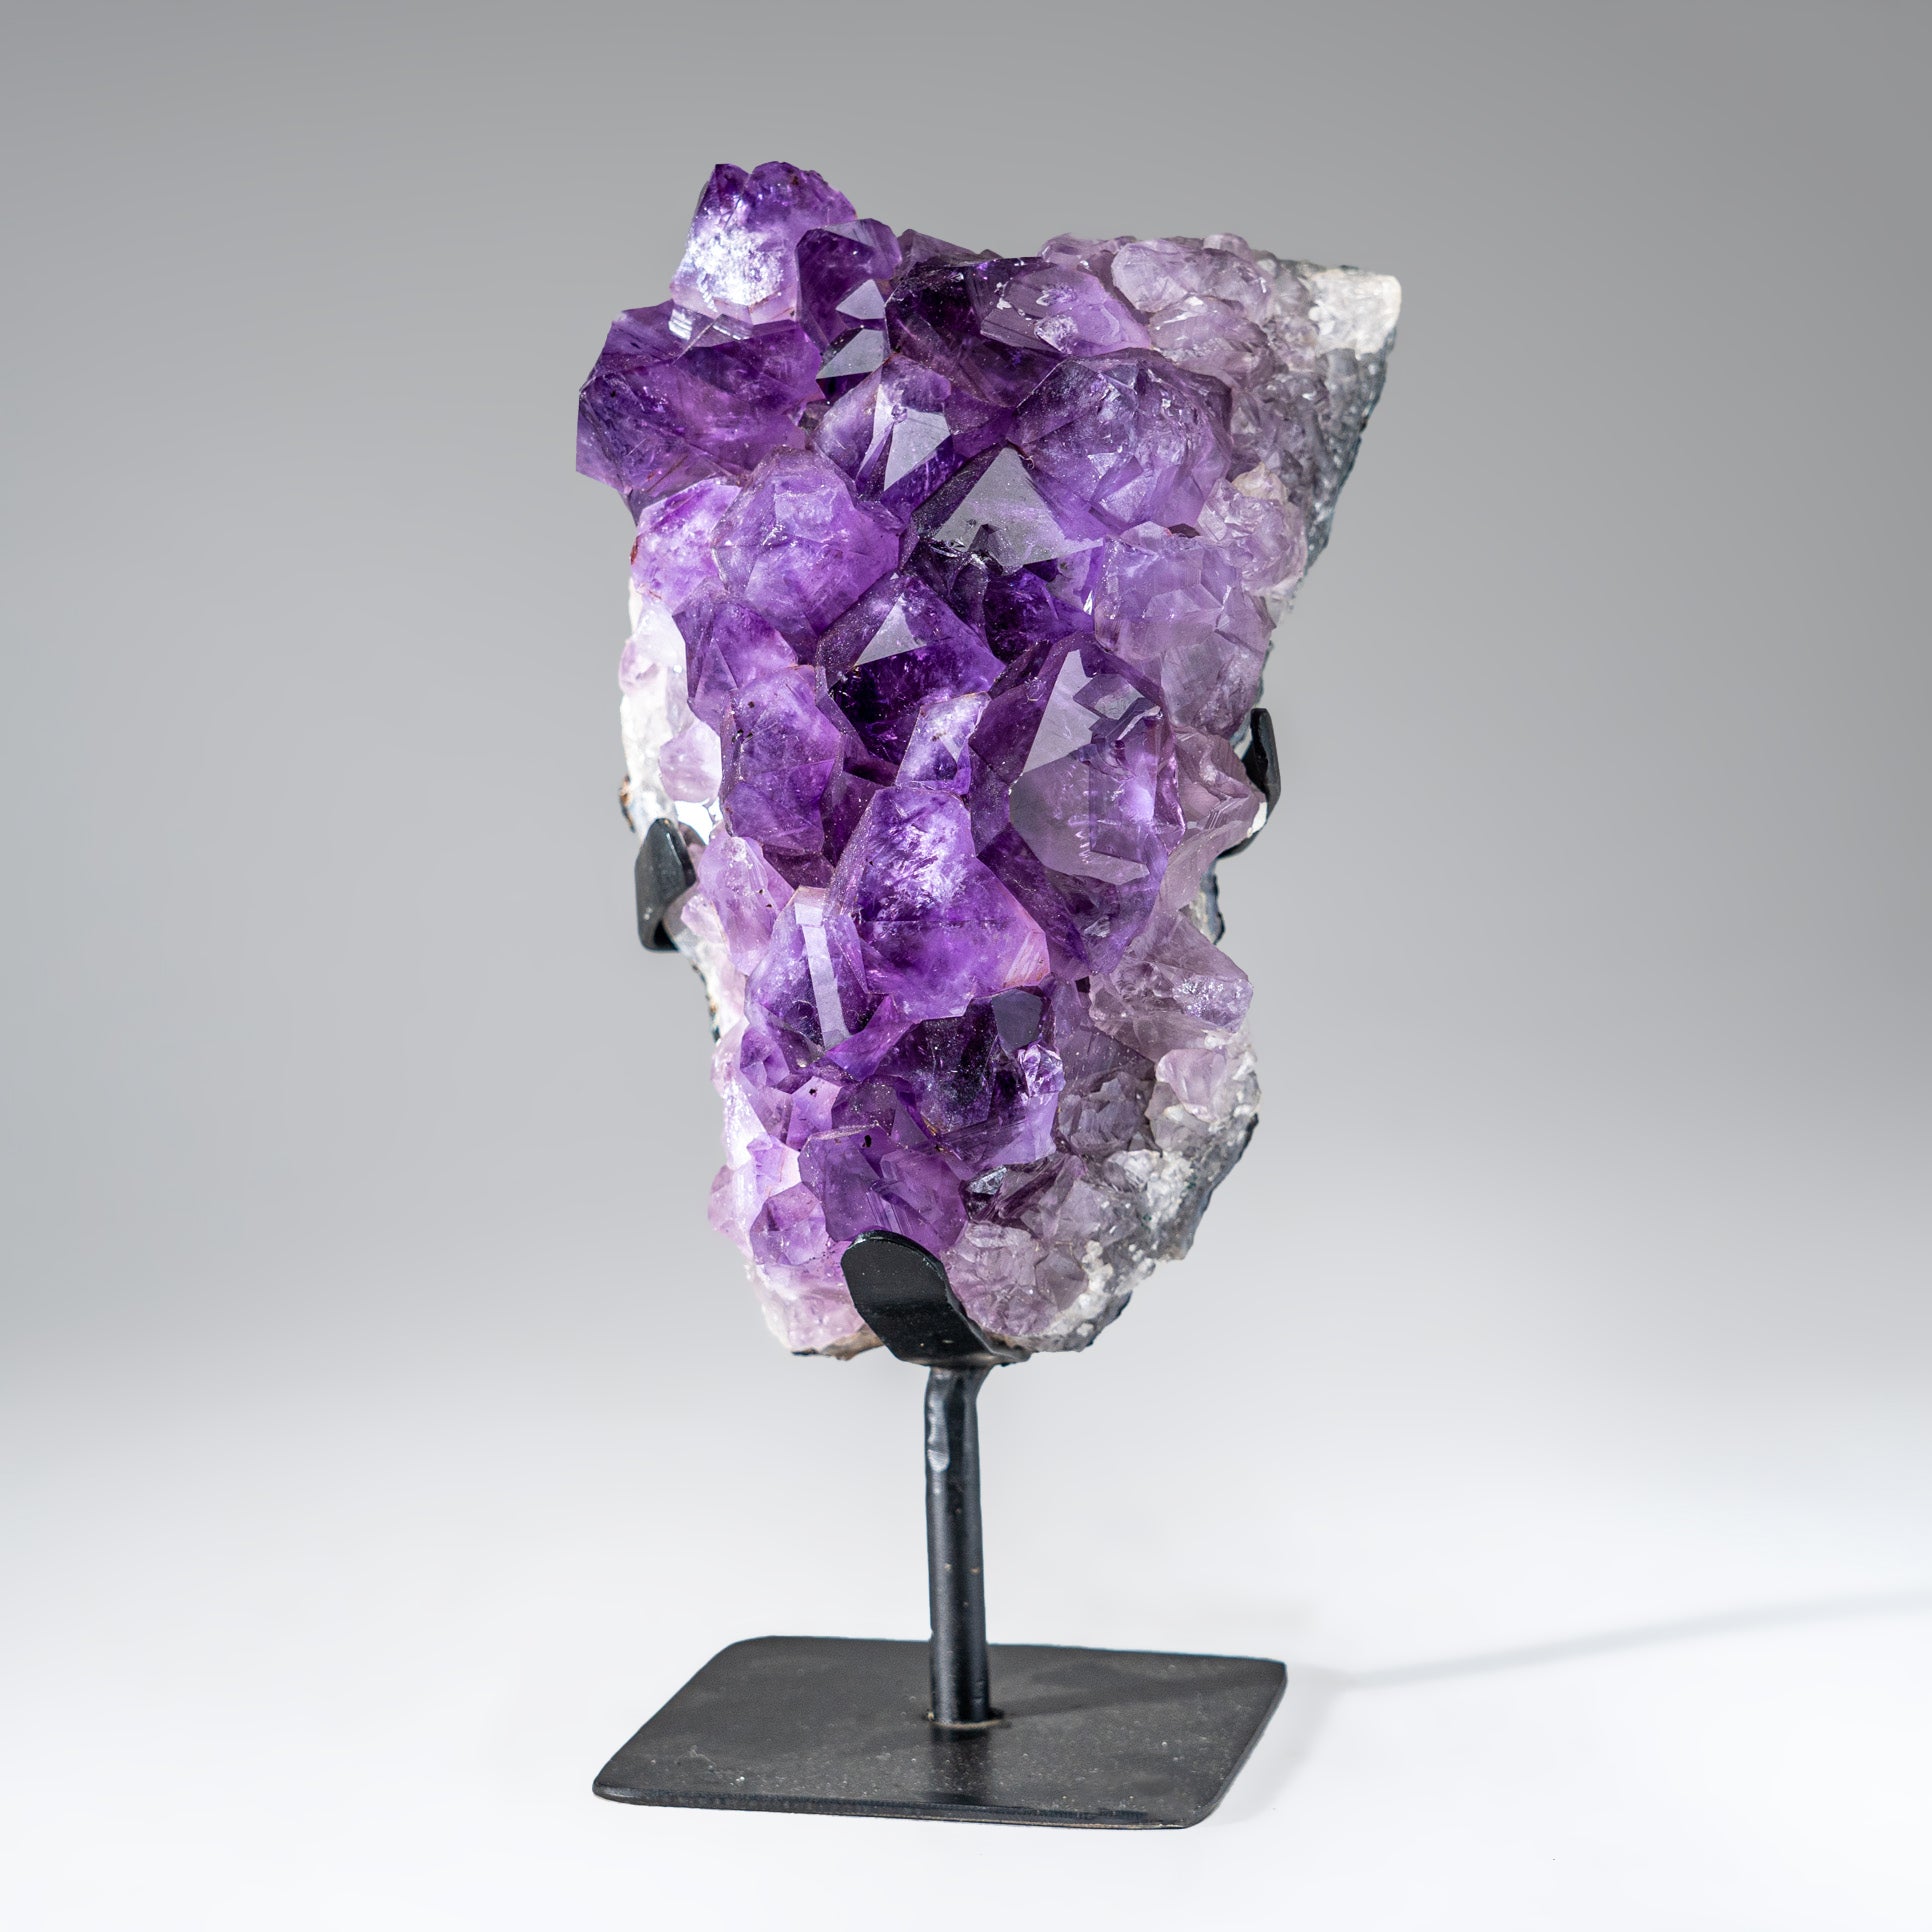 Genuine Amethyst Crystal Cluster on Stand from Brazil (6.8 lbs) ACS55